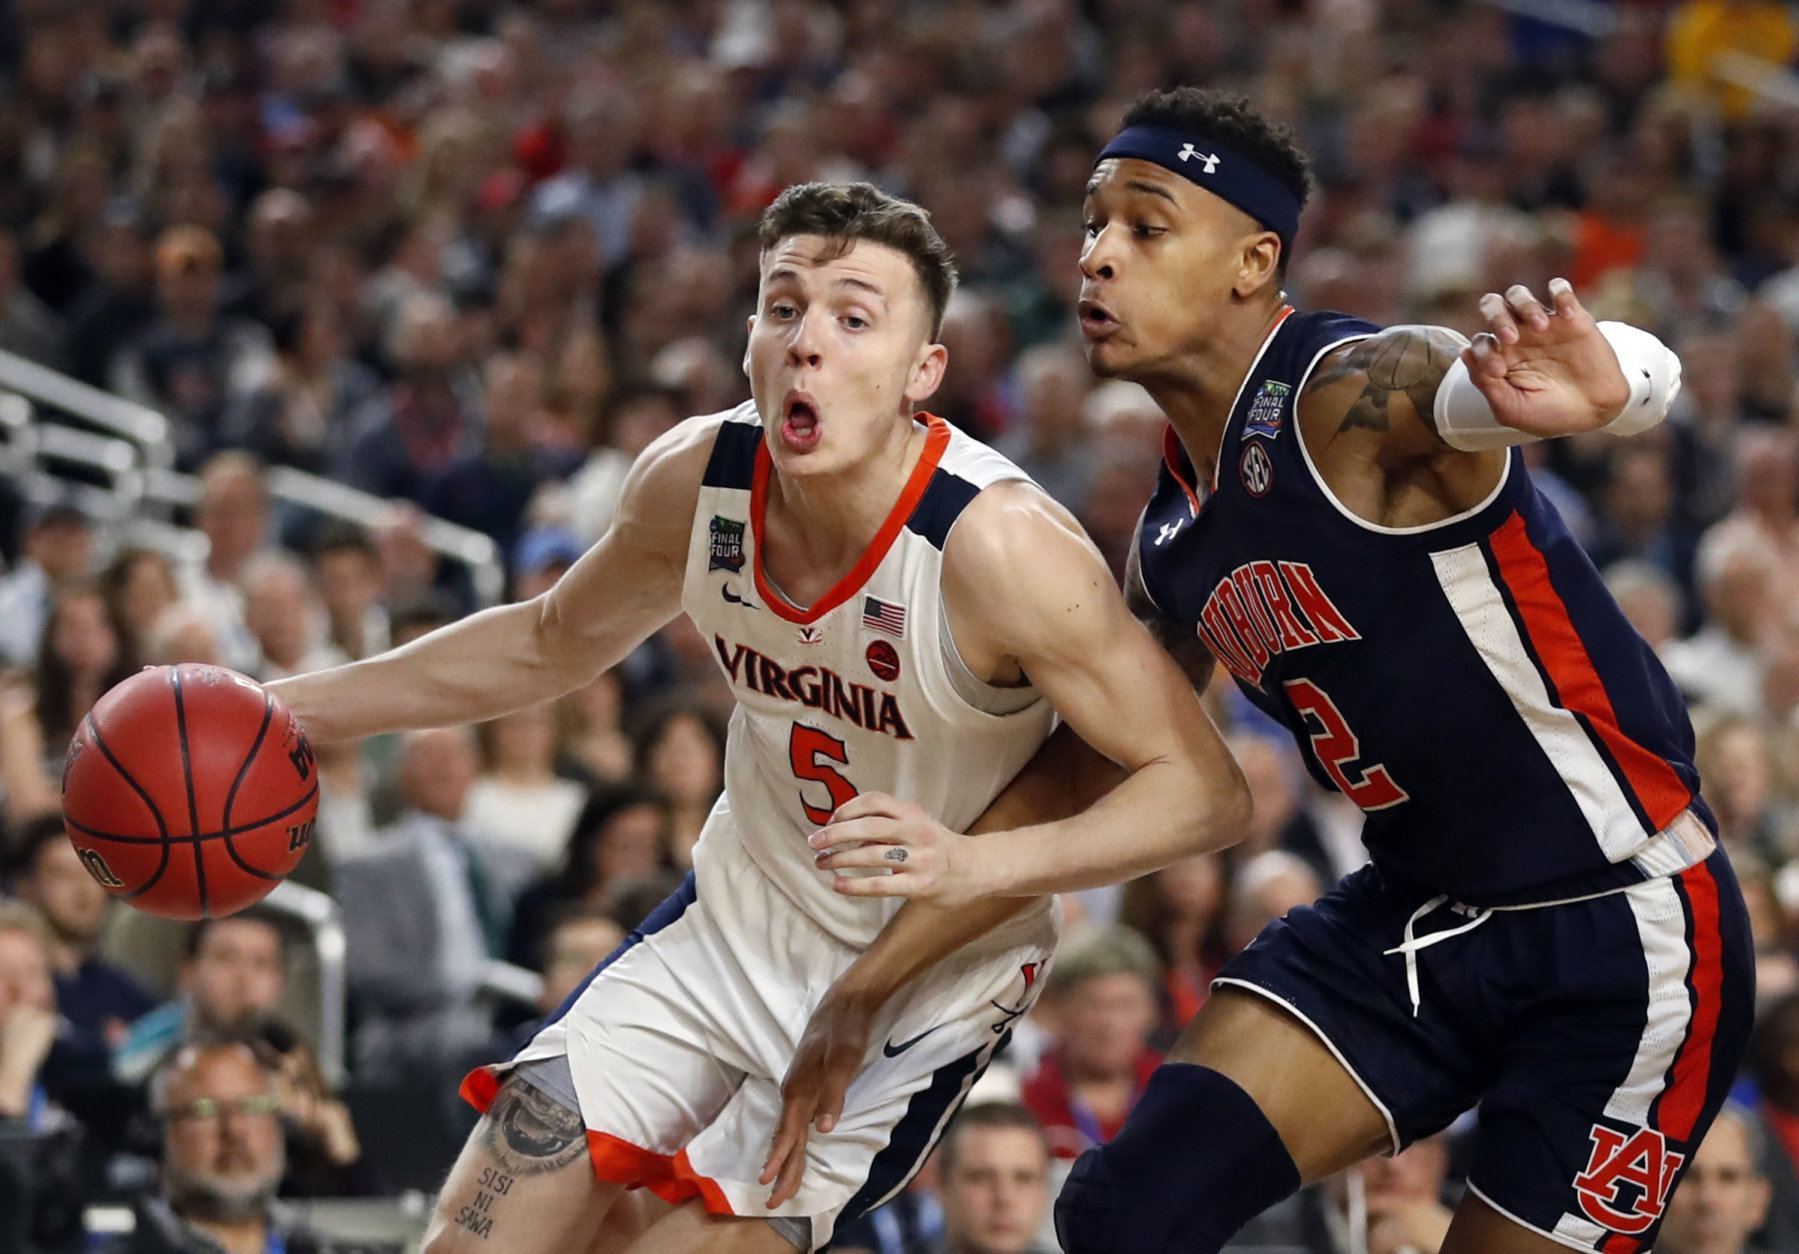 Virginia's Kyle Guy (5) drives against Auburn's Bryce Brown (2) during the first half in the semifinals of the Final Four NCAA college basketball tournament, Saturday, April 6, 2019, in Minneapolis. (AP Photo/Jeff Roberson)